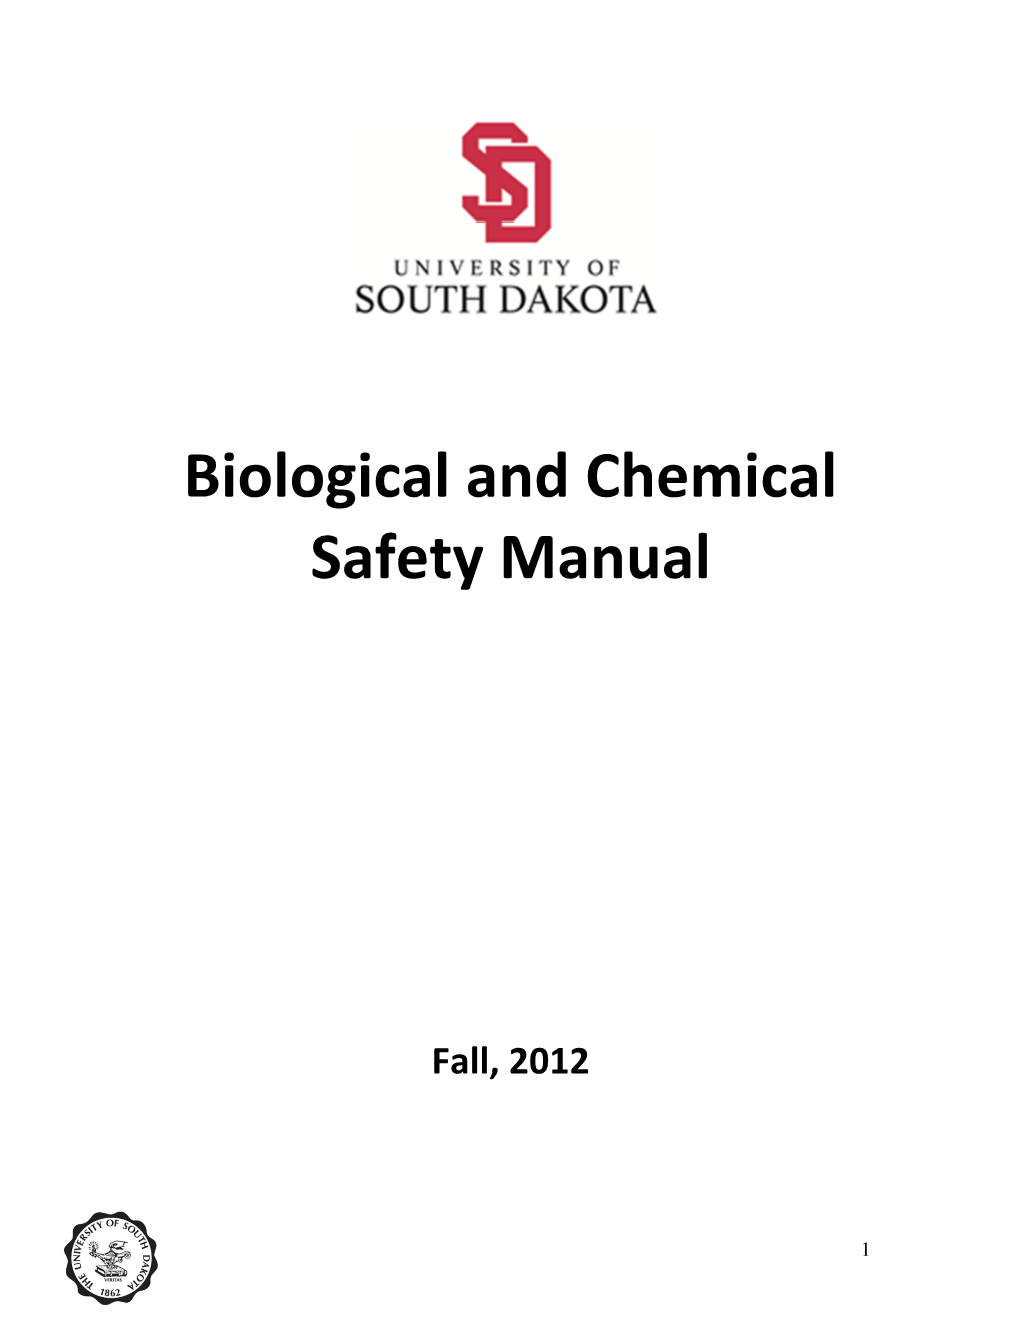 Biological and Chemical Safety Manual